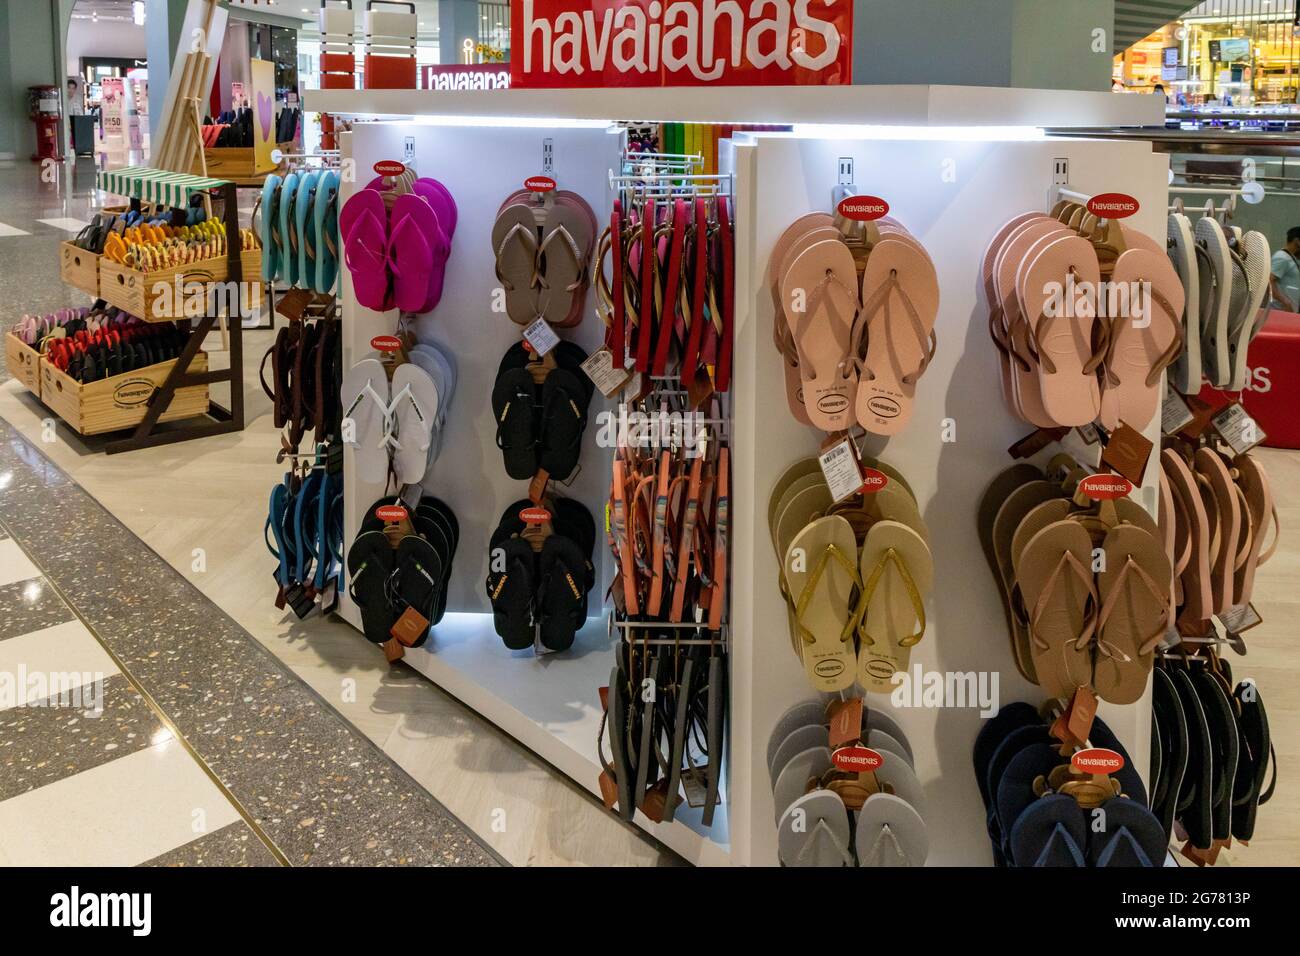 Havaianas store in shopping mall in Phuket, Thailand Stock Photo - Alamy